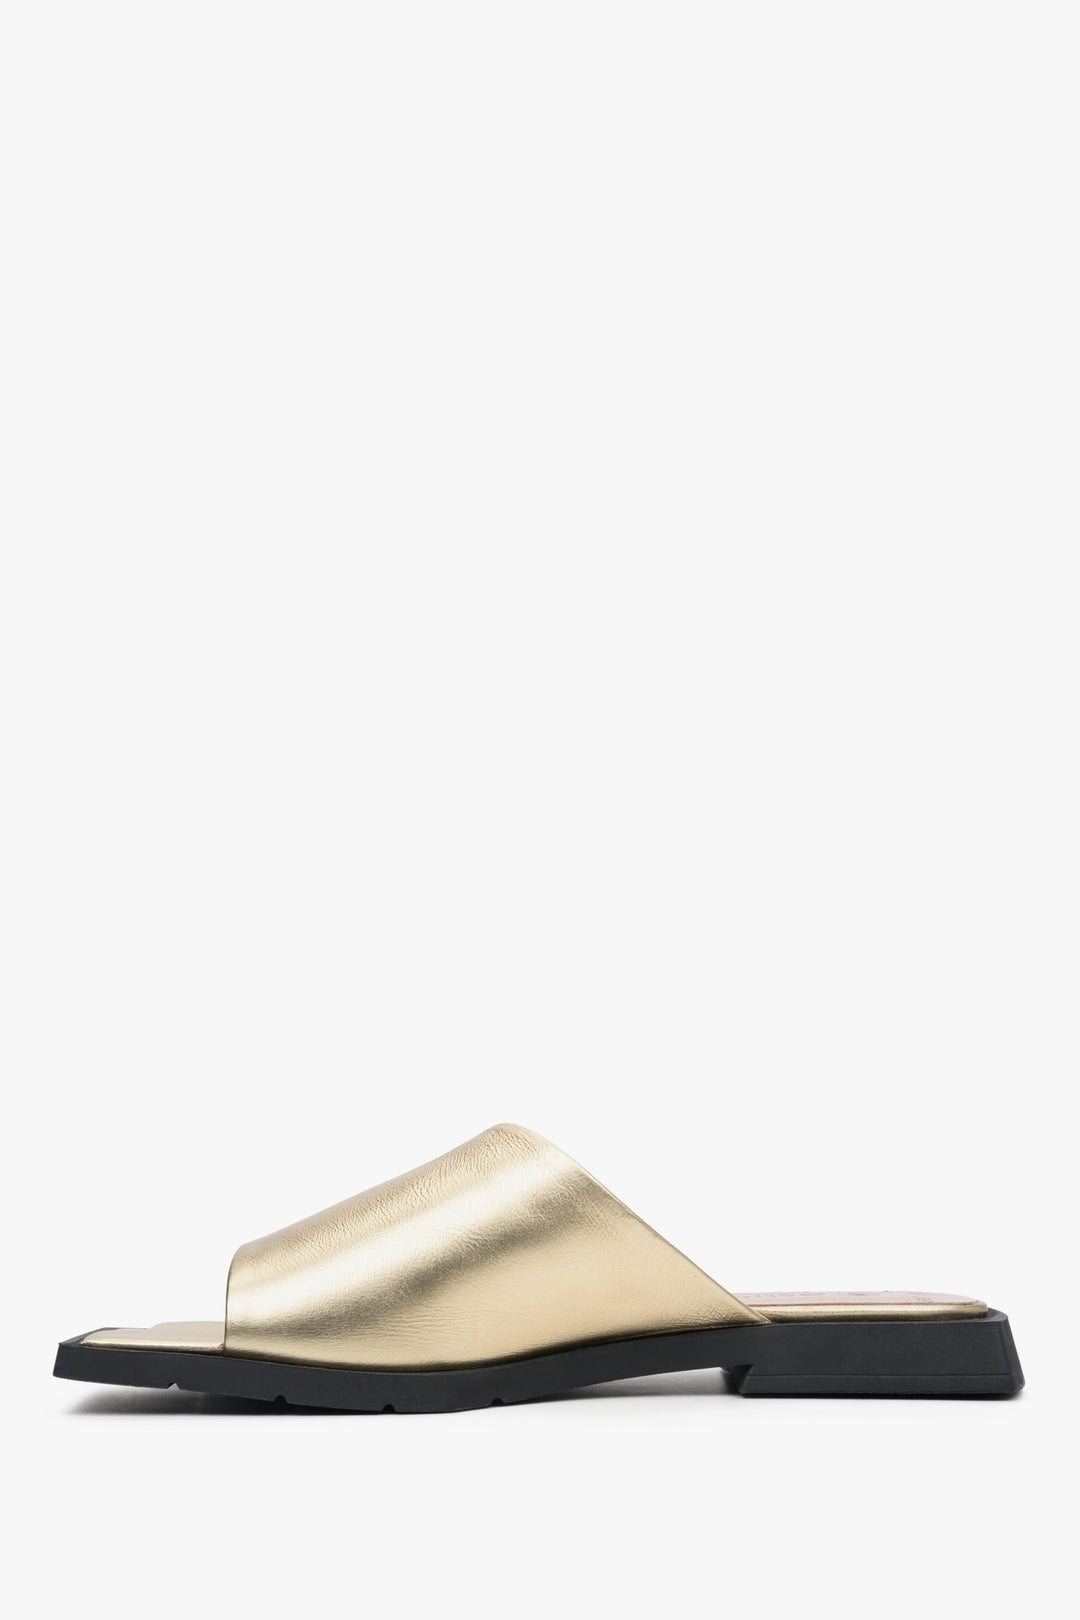 Women's natural leather mules for summer, gold. Estro brand footwear profile.